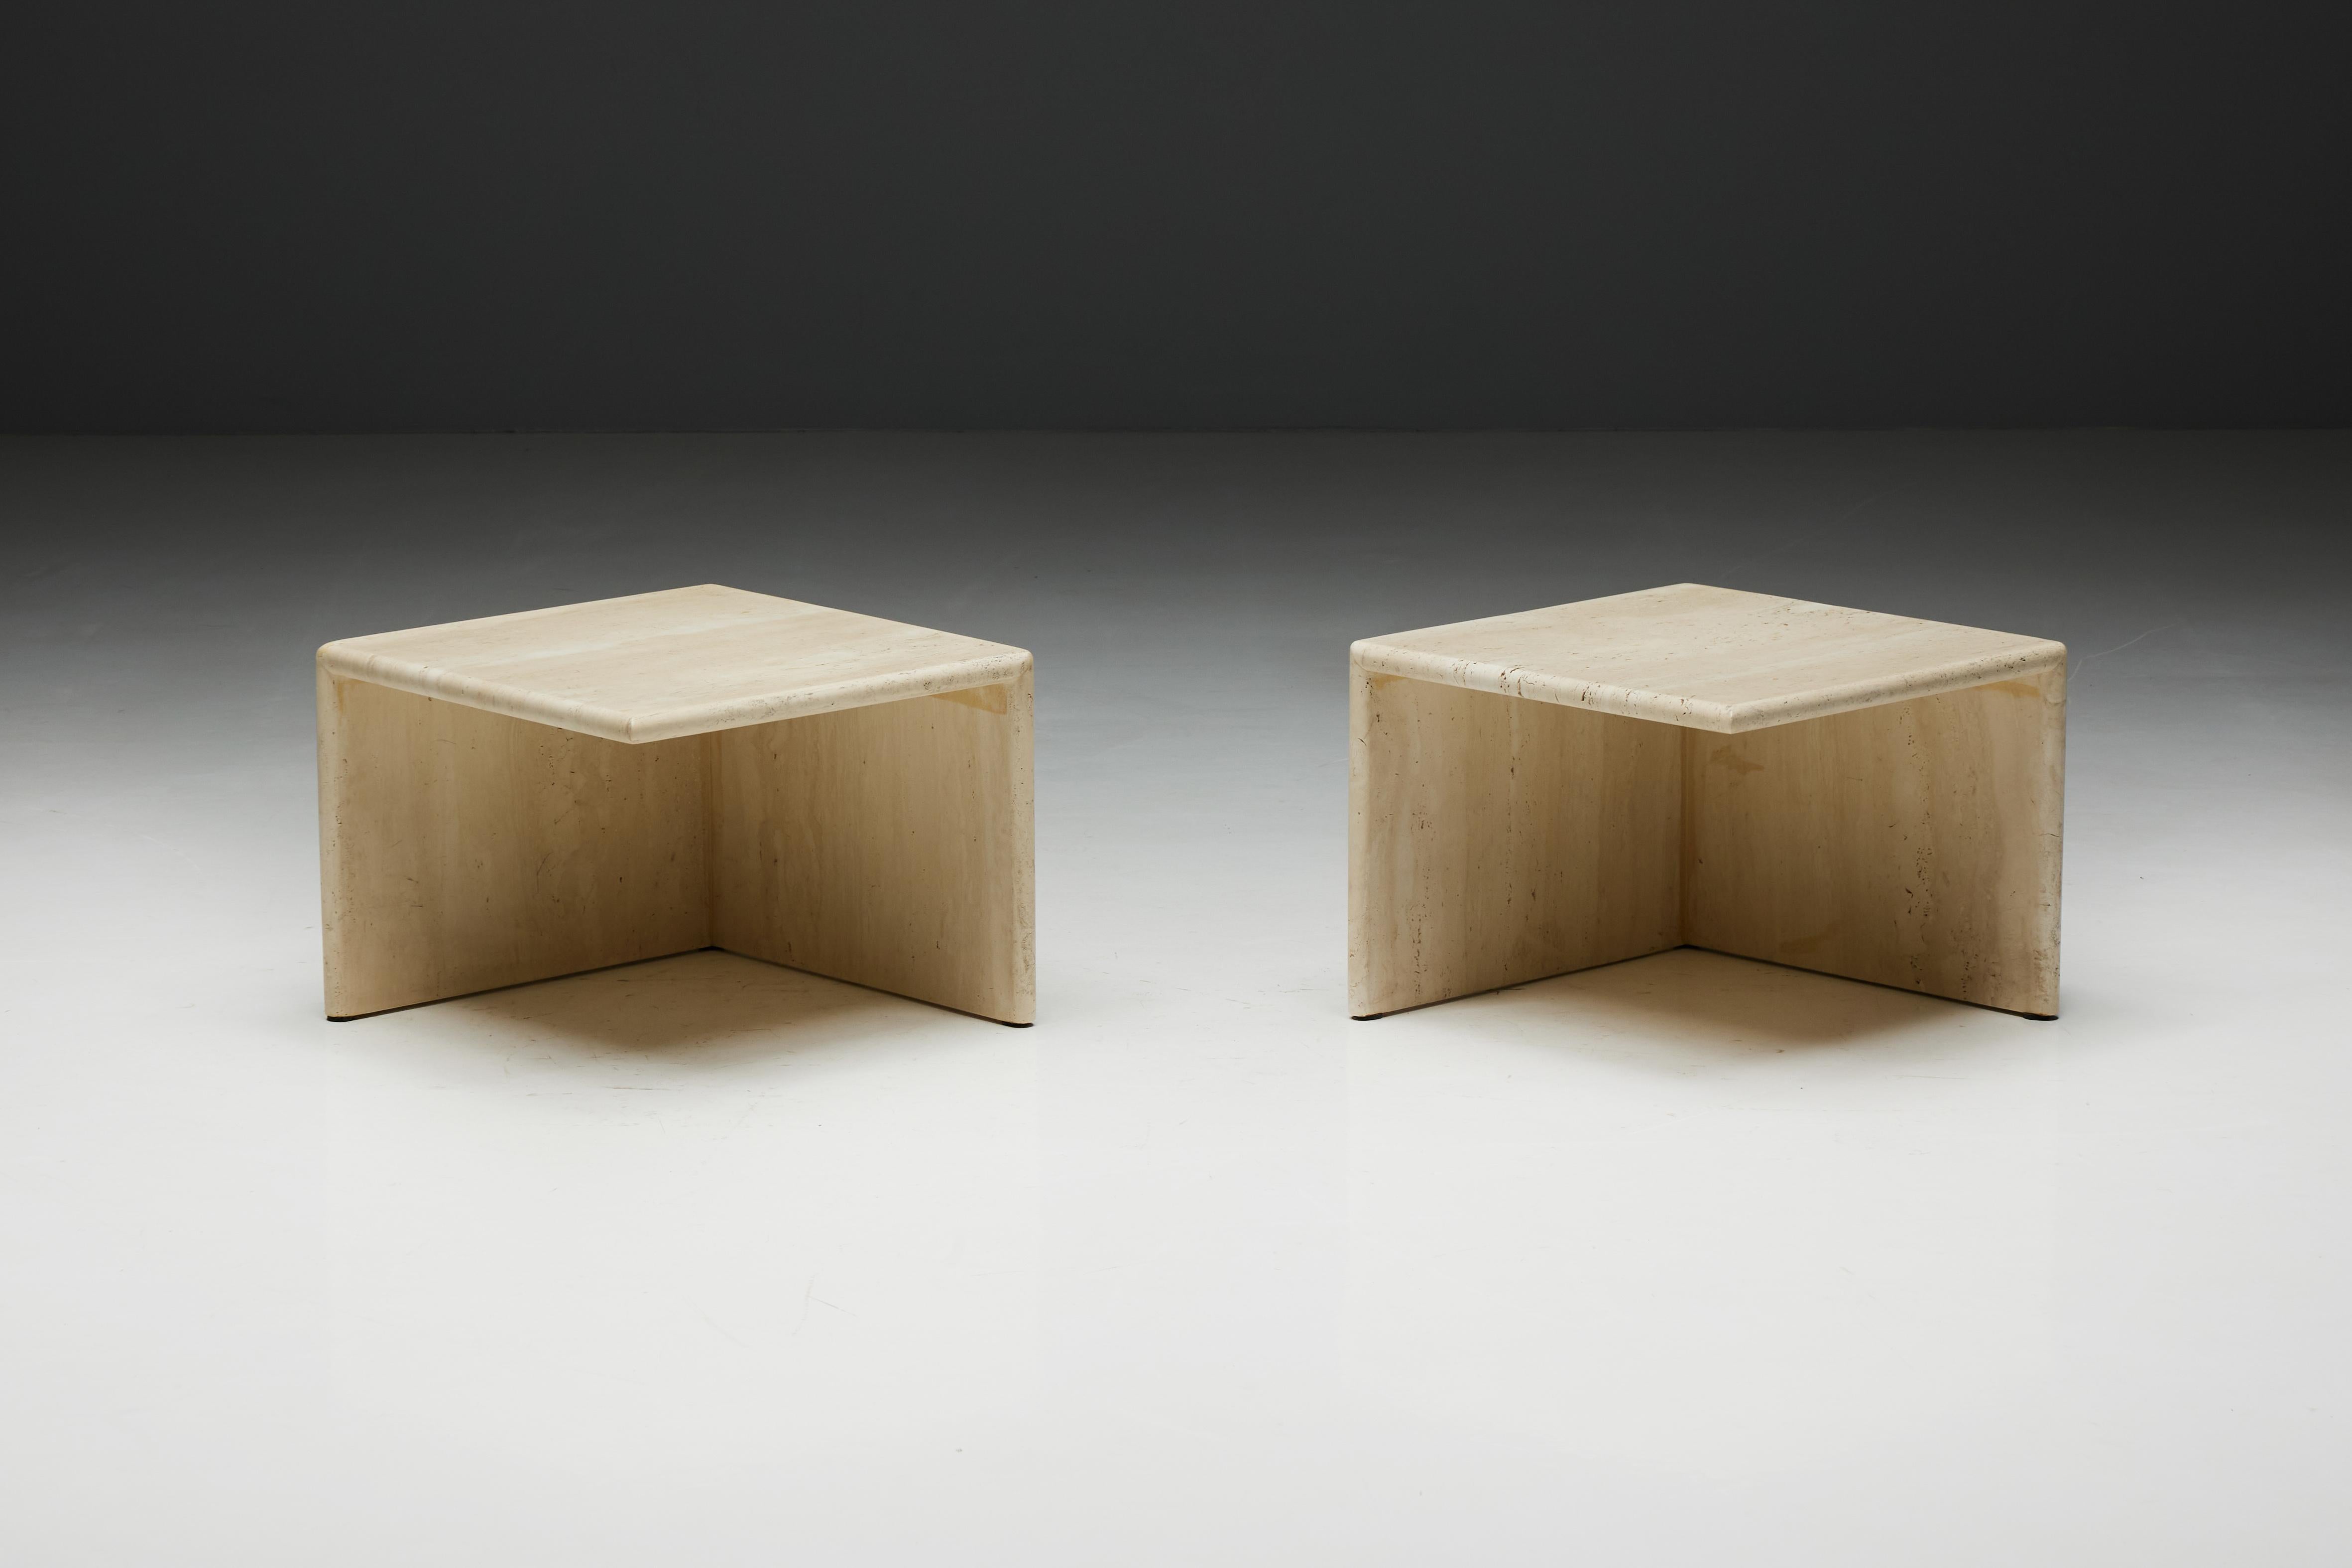 Travertine side tables, a unique design featuring a square top. These tables boast a distinctive feature, one side resembling a closed cube, while the other side is open, offering a captivating visual contrast. These unique pieces are in excellent